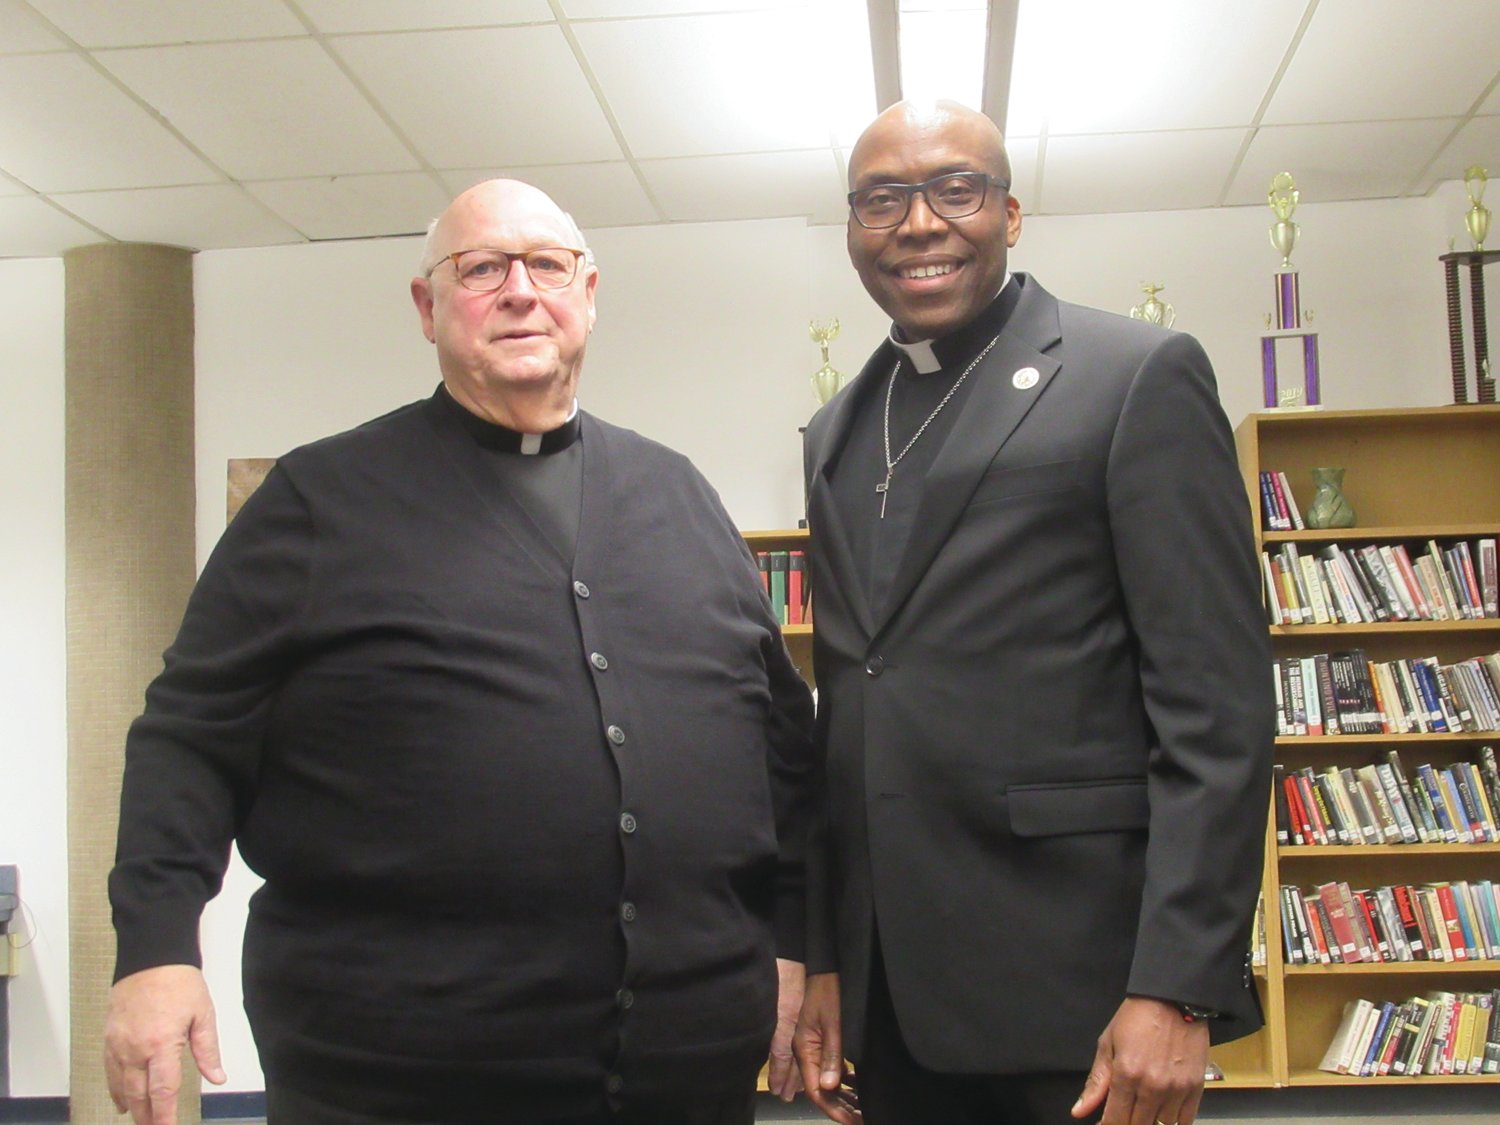 PASTORS: Rev. Peter J. Gower of Our Lady of Grace Church delivered the Innovation Monday night and Rev. Chris Abhulime of King’s Tabernacle Church delivered the evening’s benediction.